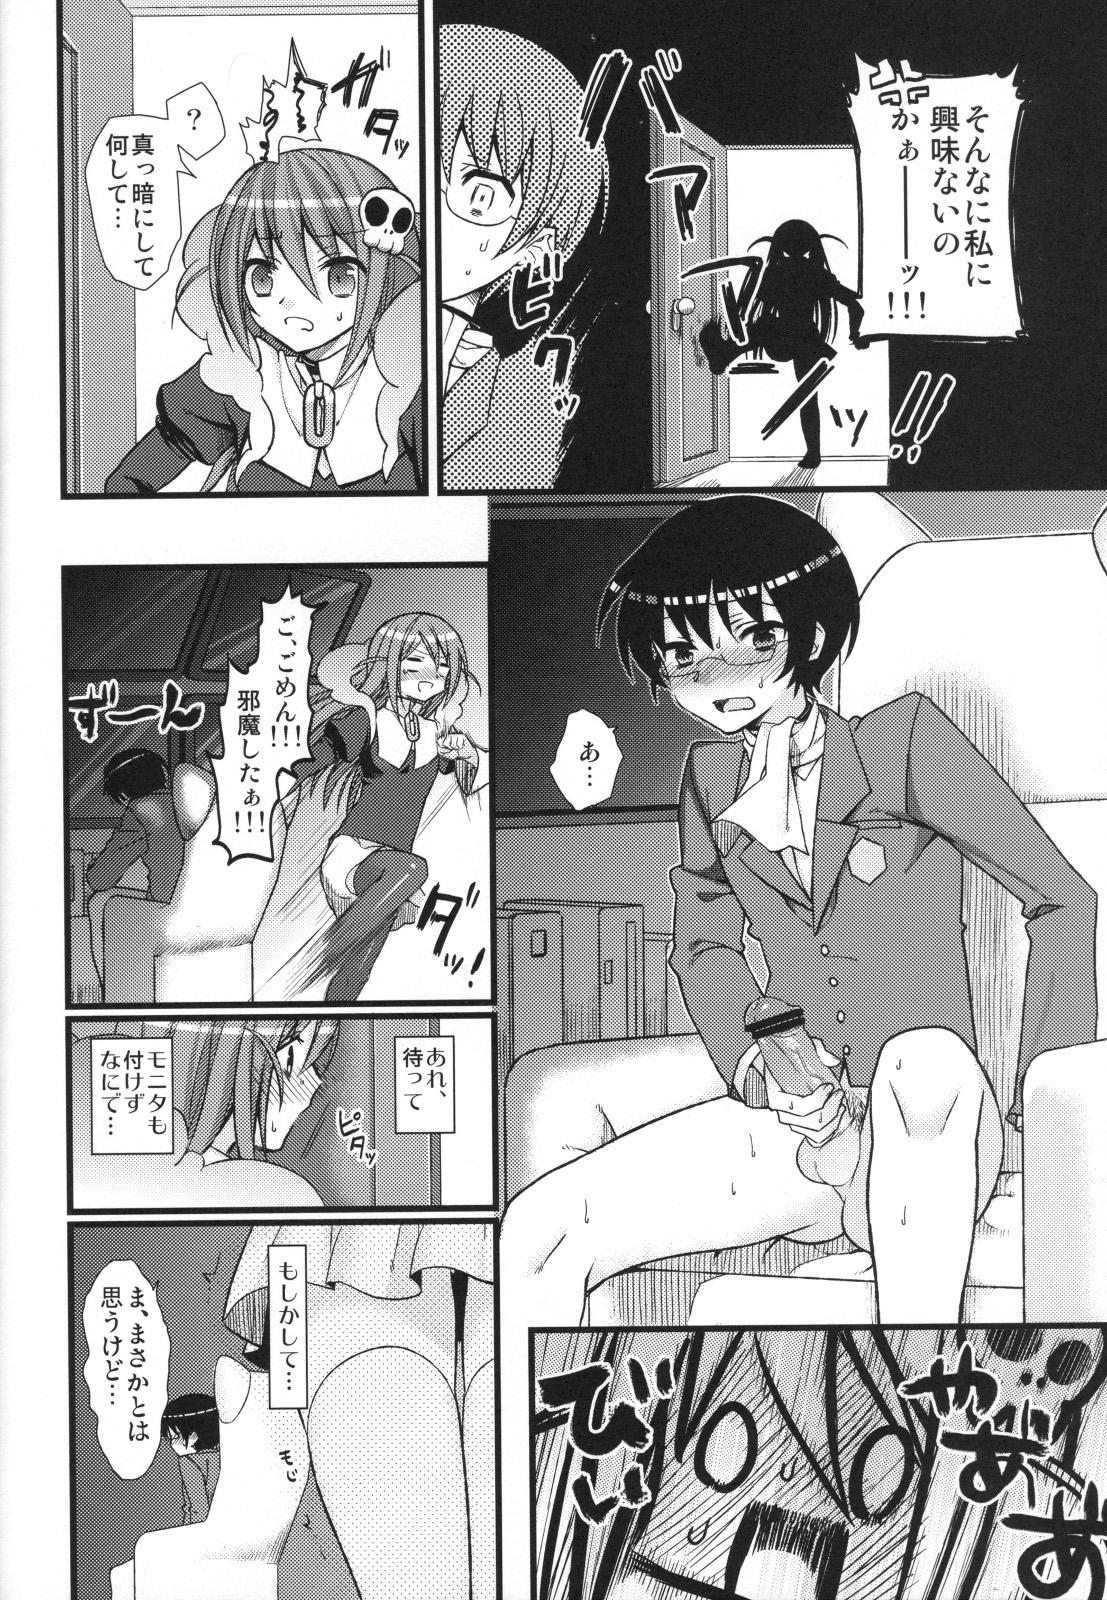 Longhair EXP.04 - The world god only knows Romantic - Page 5